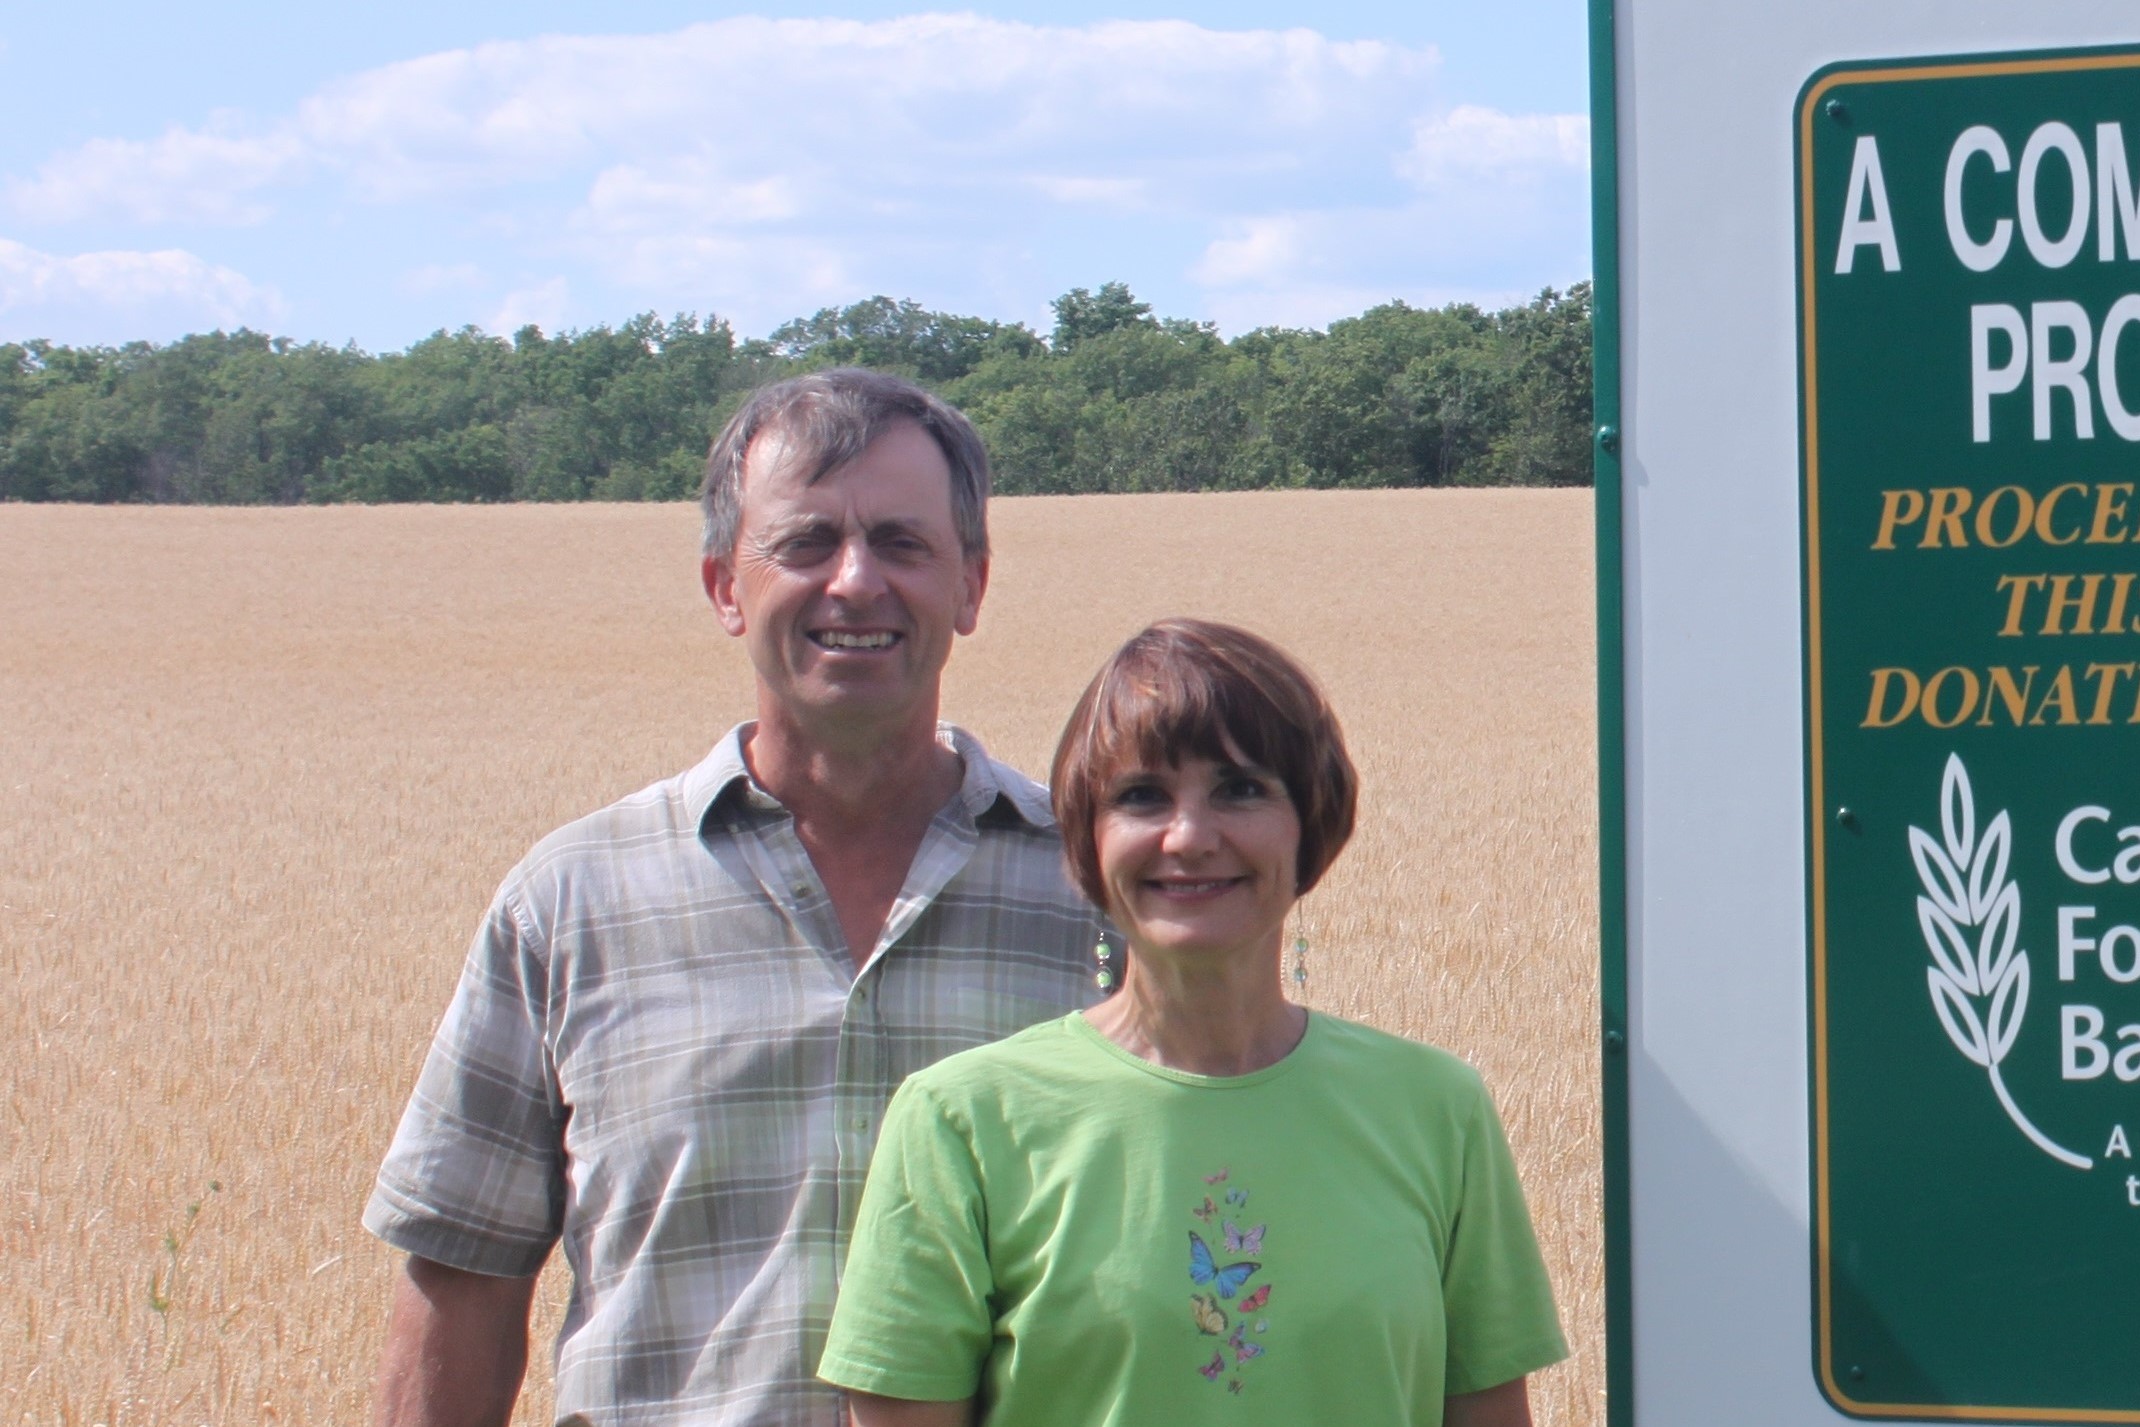 Two people standing in a field next to a sign for Canadian Foodgrains Bank